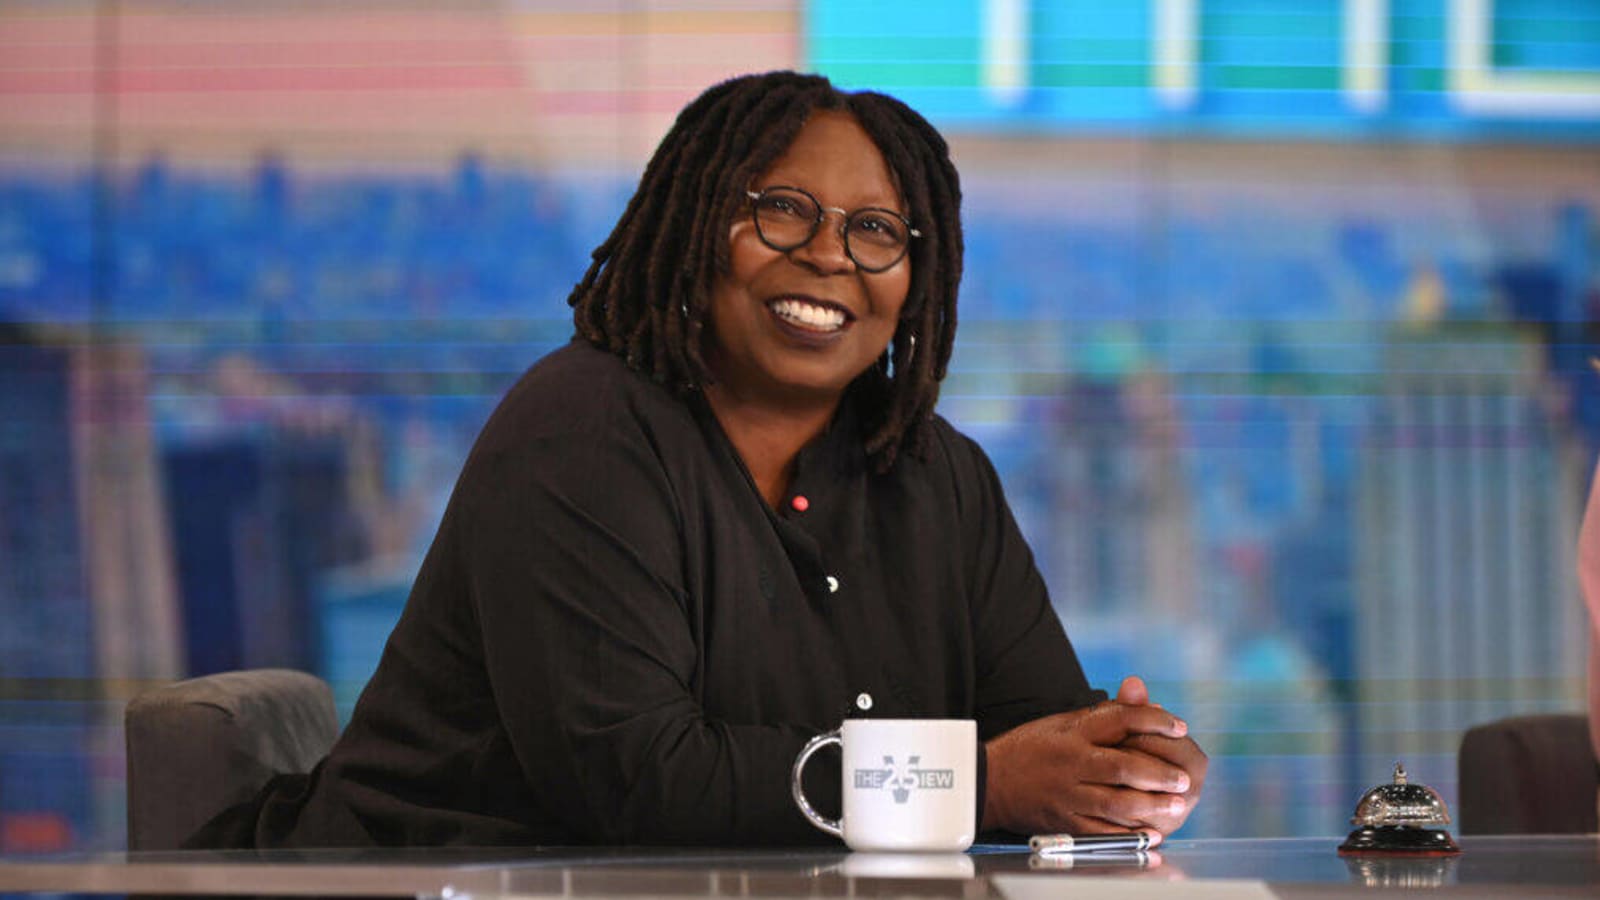 ‘The View’: Whoopi Goldberg Responds to Donald Trump’s Meme About Her Moving to Canada